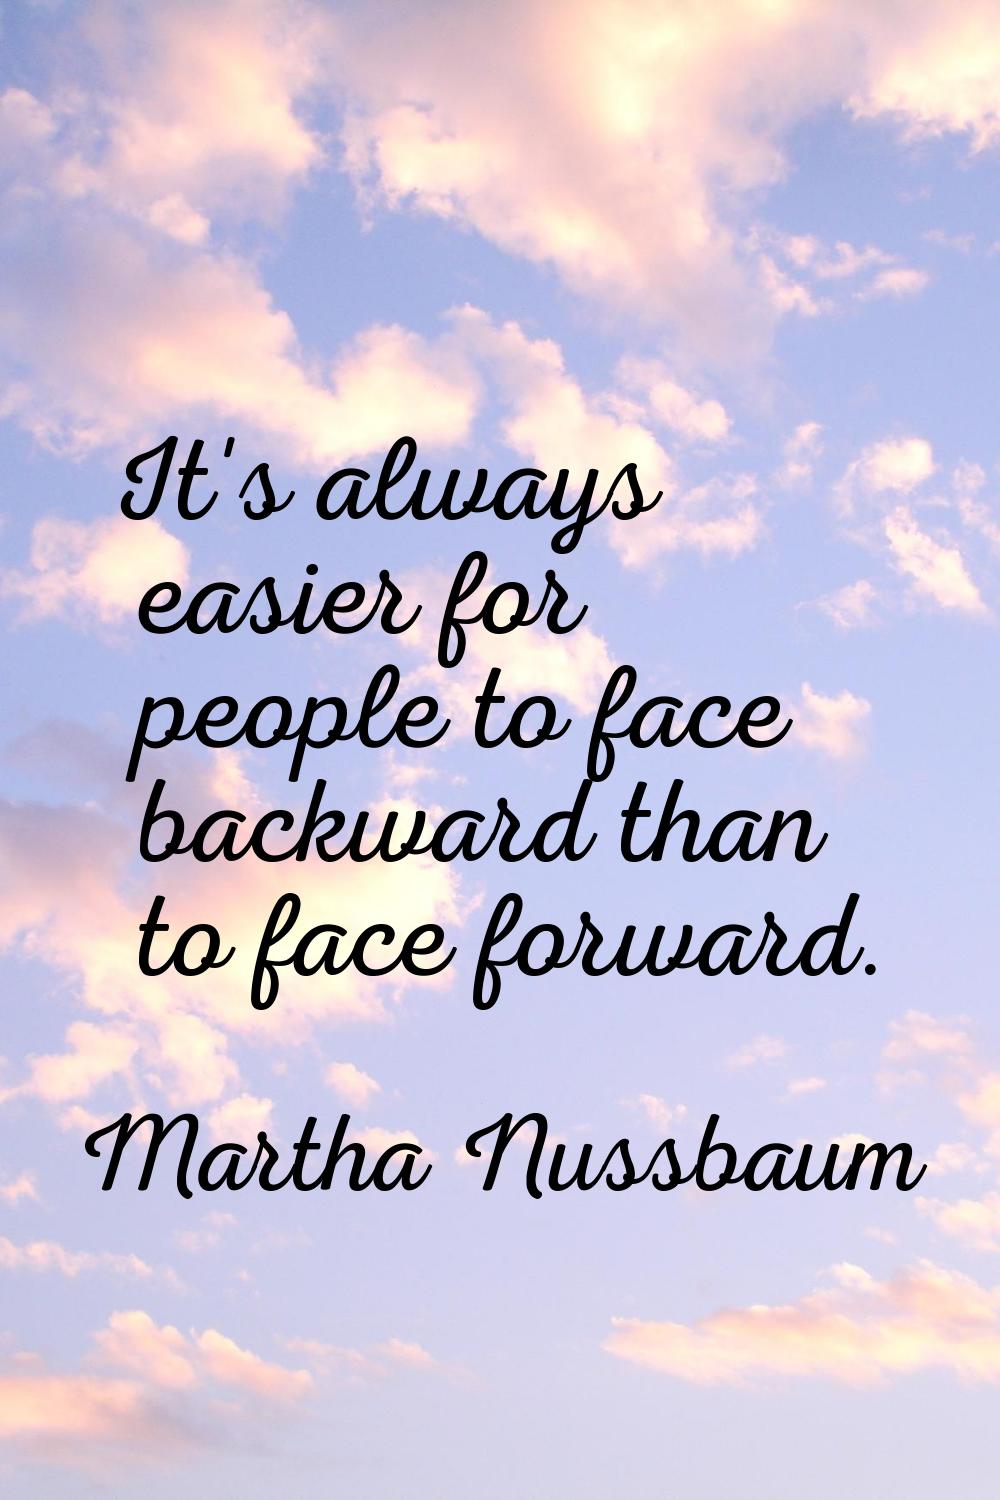 It's always easier for people to face backward than to face forward.